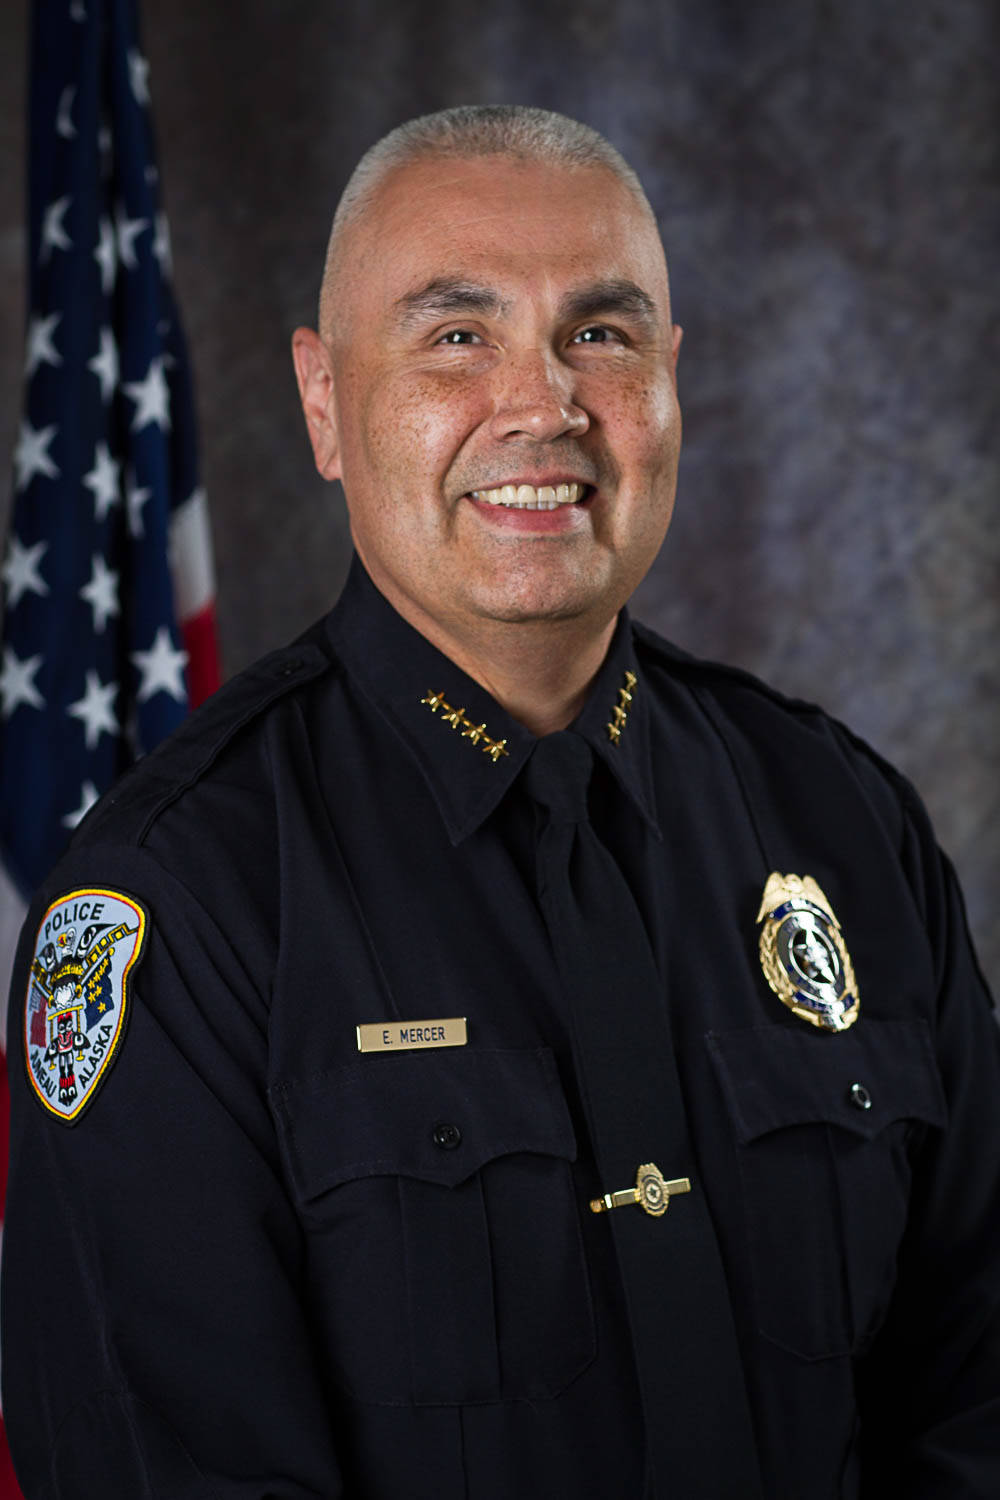 Juneau Police Chief Ed Mercer is seen in his official city portrait. (Juneau Police Department photo)